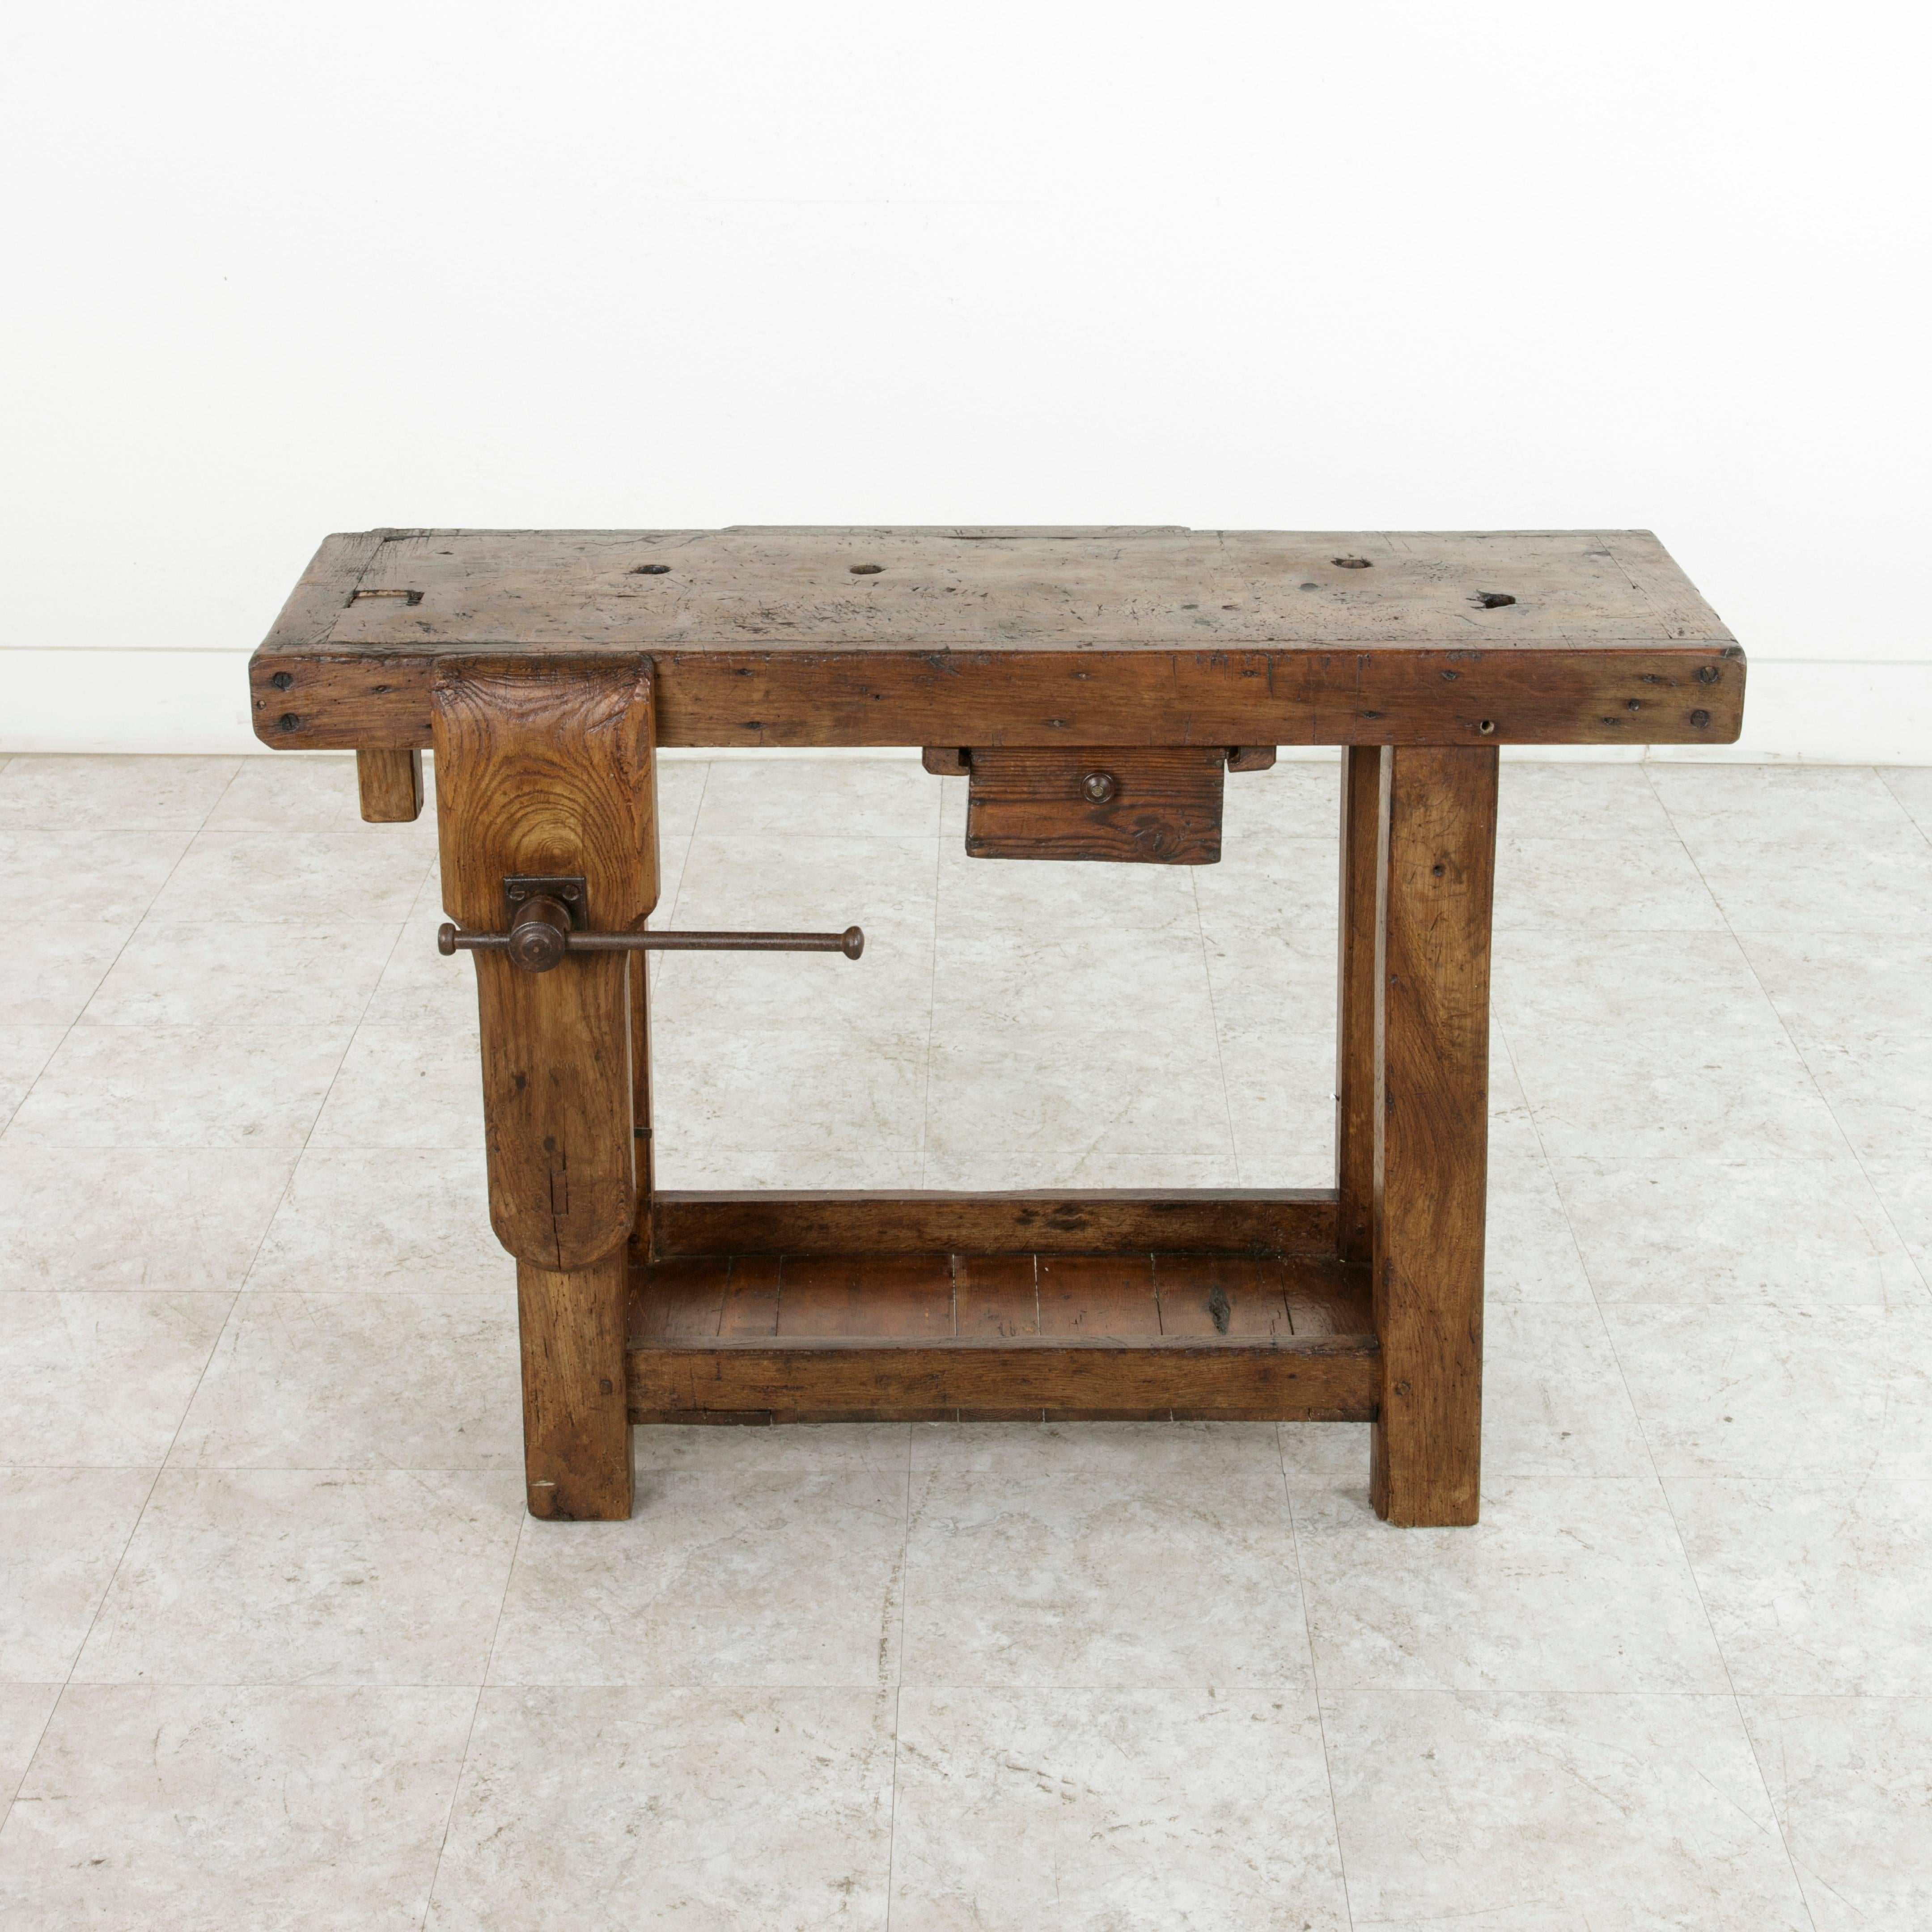 This early 20th century workbench from Normandy, France, is constructed of solid oak and beech and features a three inch thick top with a single lower drawer. Two slots at the back of the workbench were used to hold tools. The back of its drawer